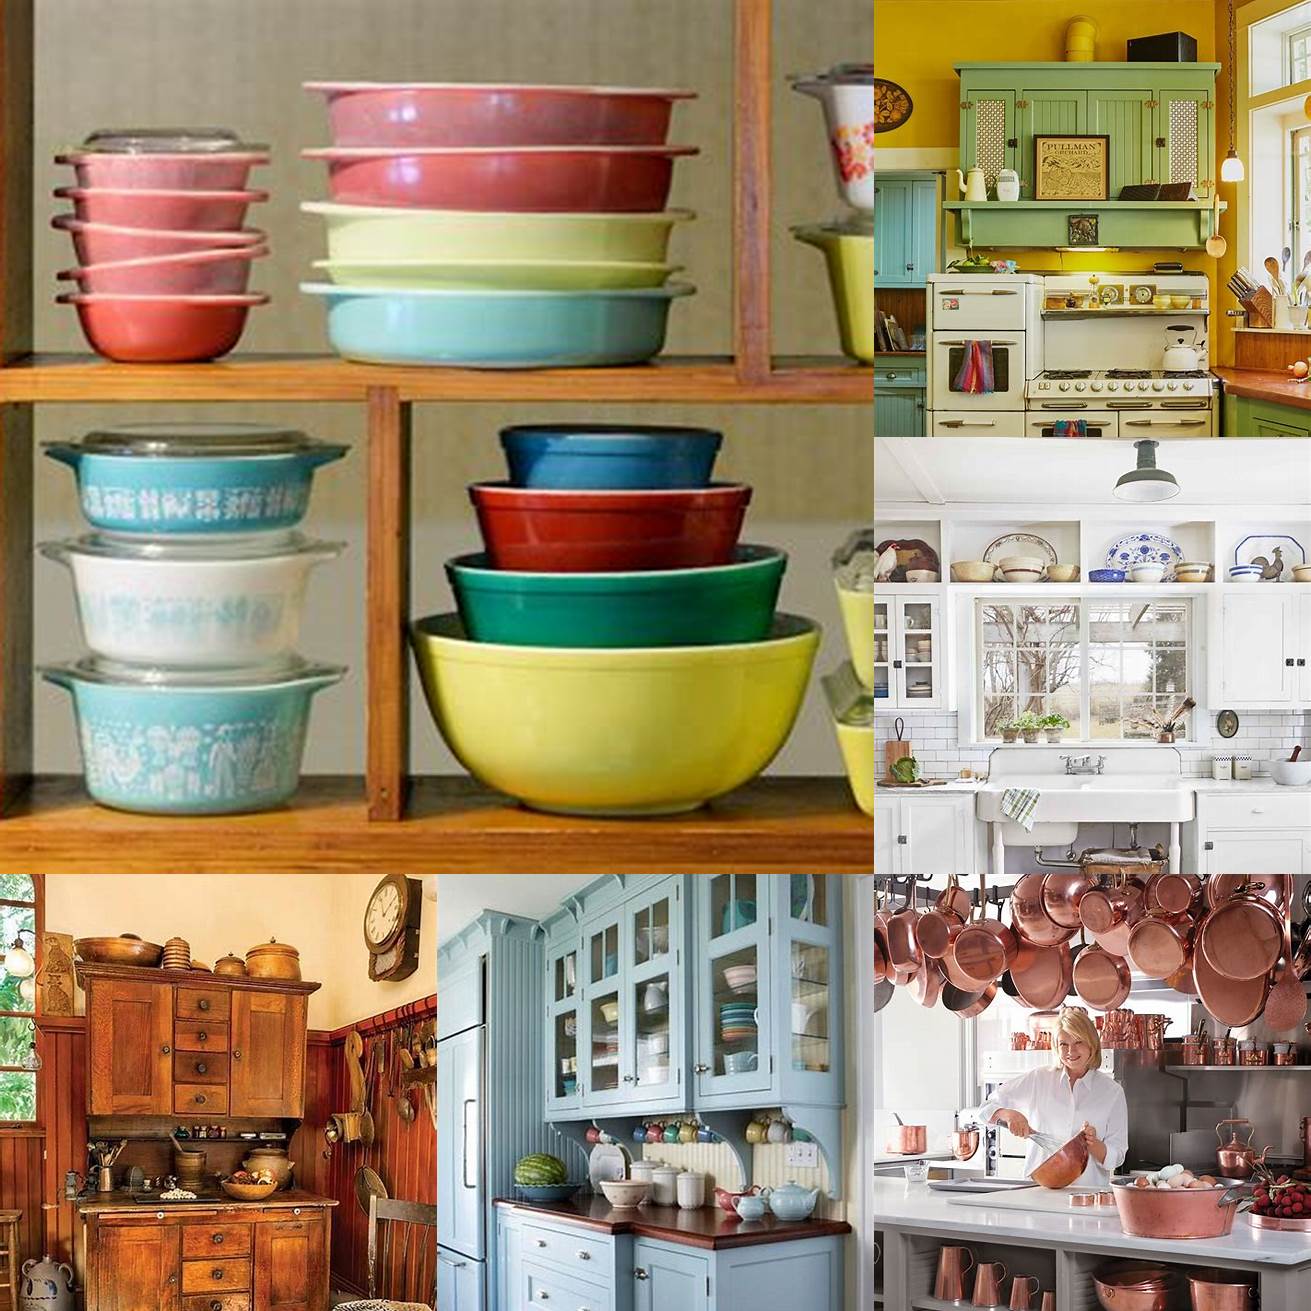 4 Showcase your collections such as vintage kitchenware on top of your cabinets